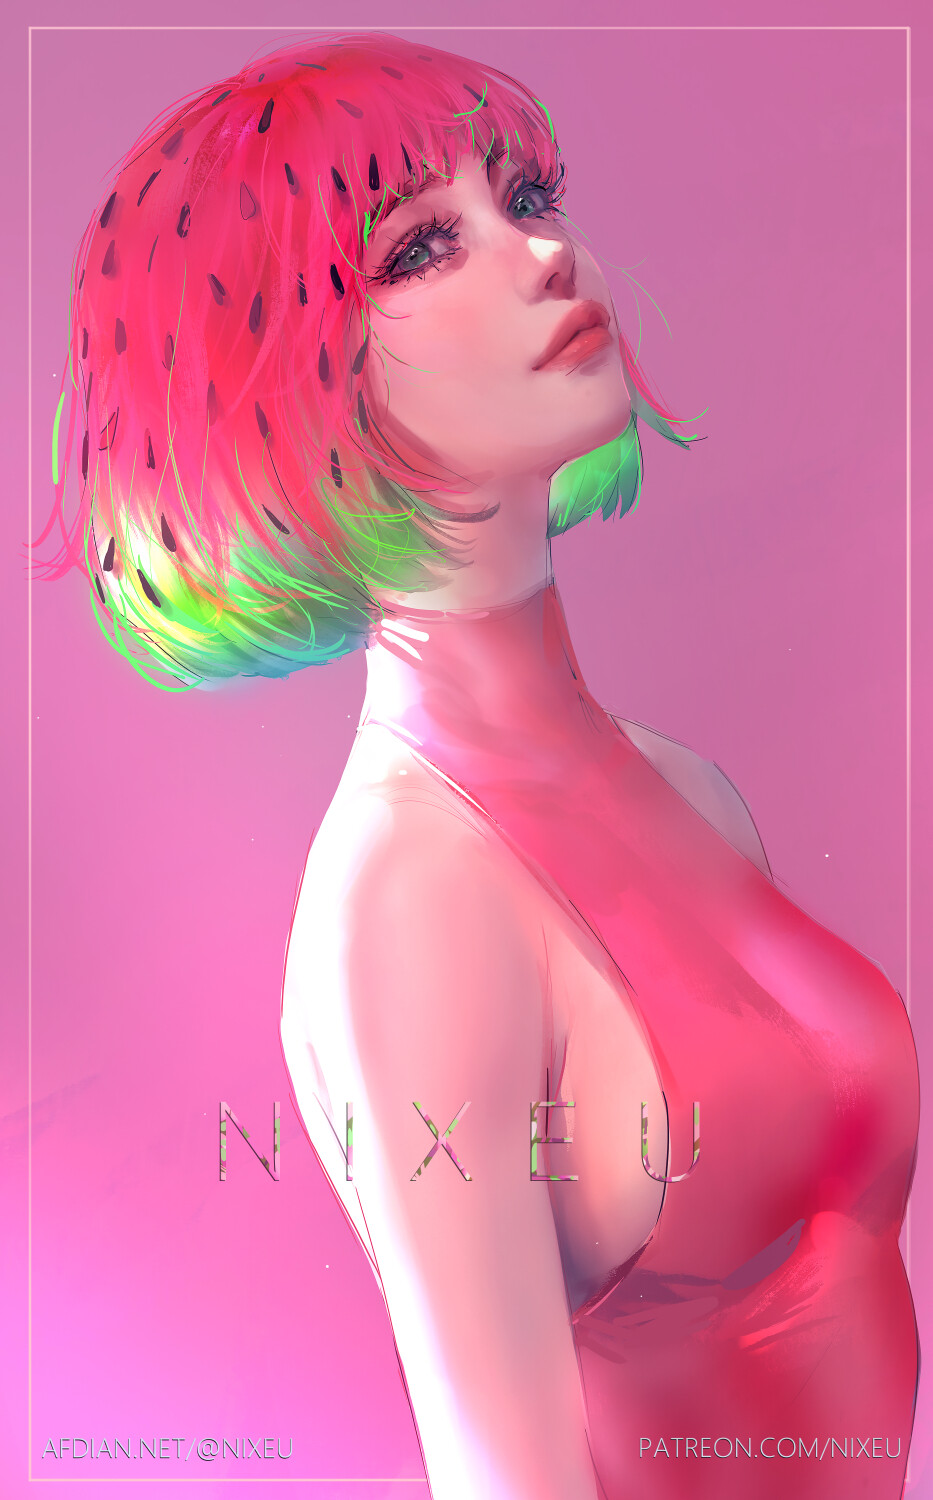 Nixeu Drawing Women Dyed Hair Colorful Looking Up Pink Watermelons 933x1500